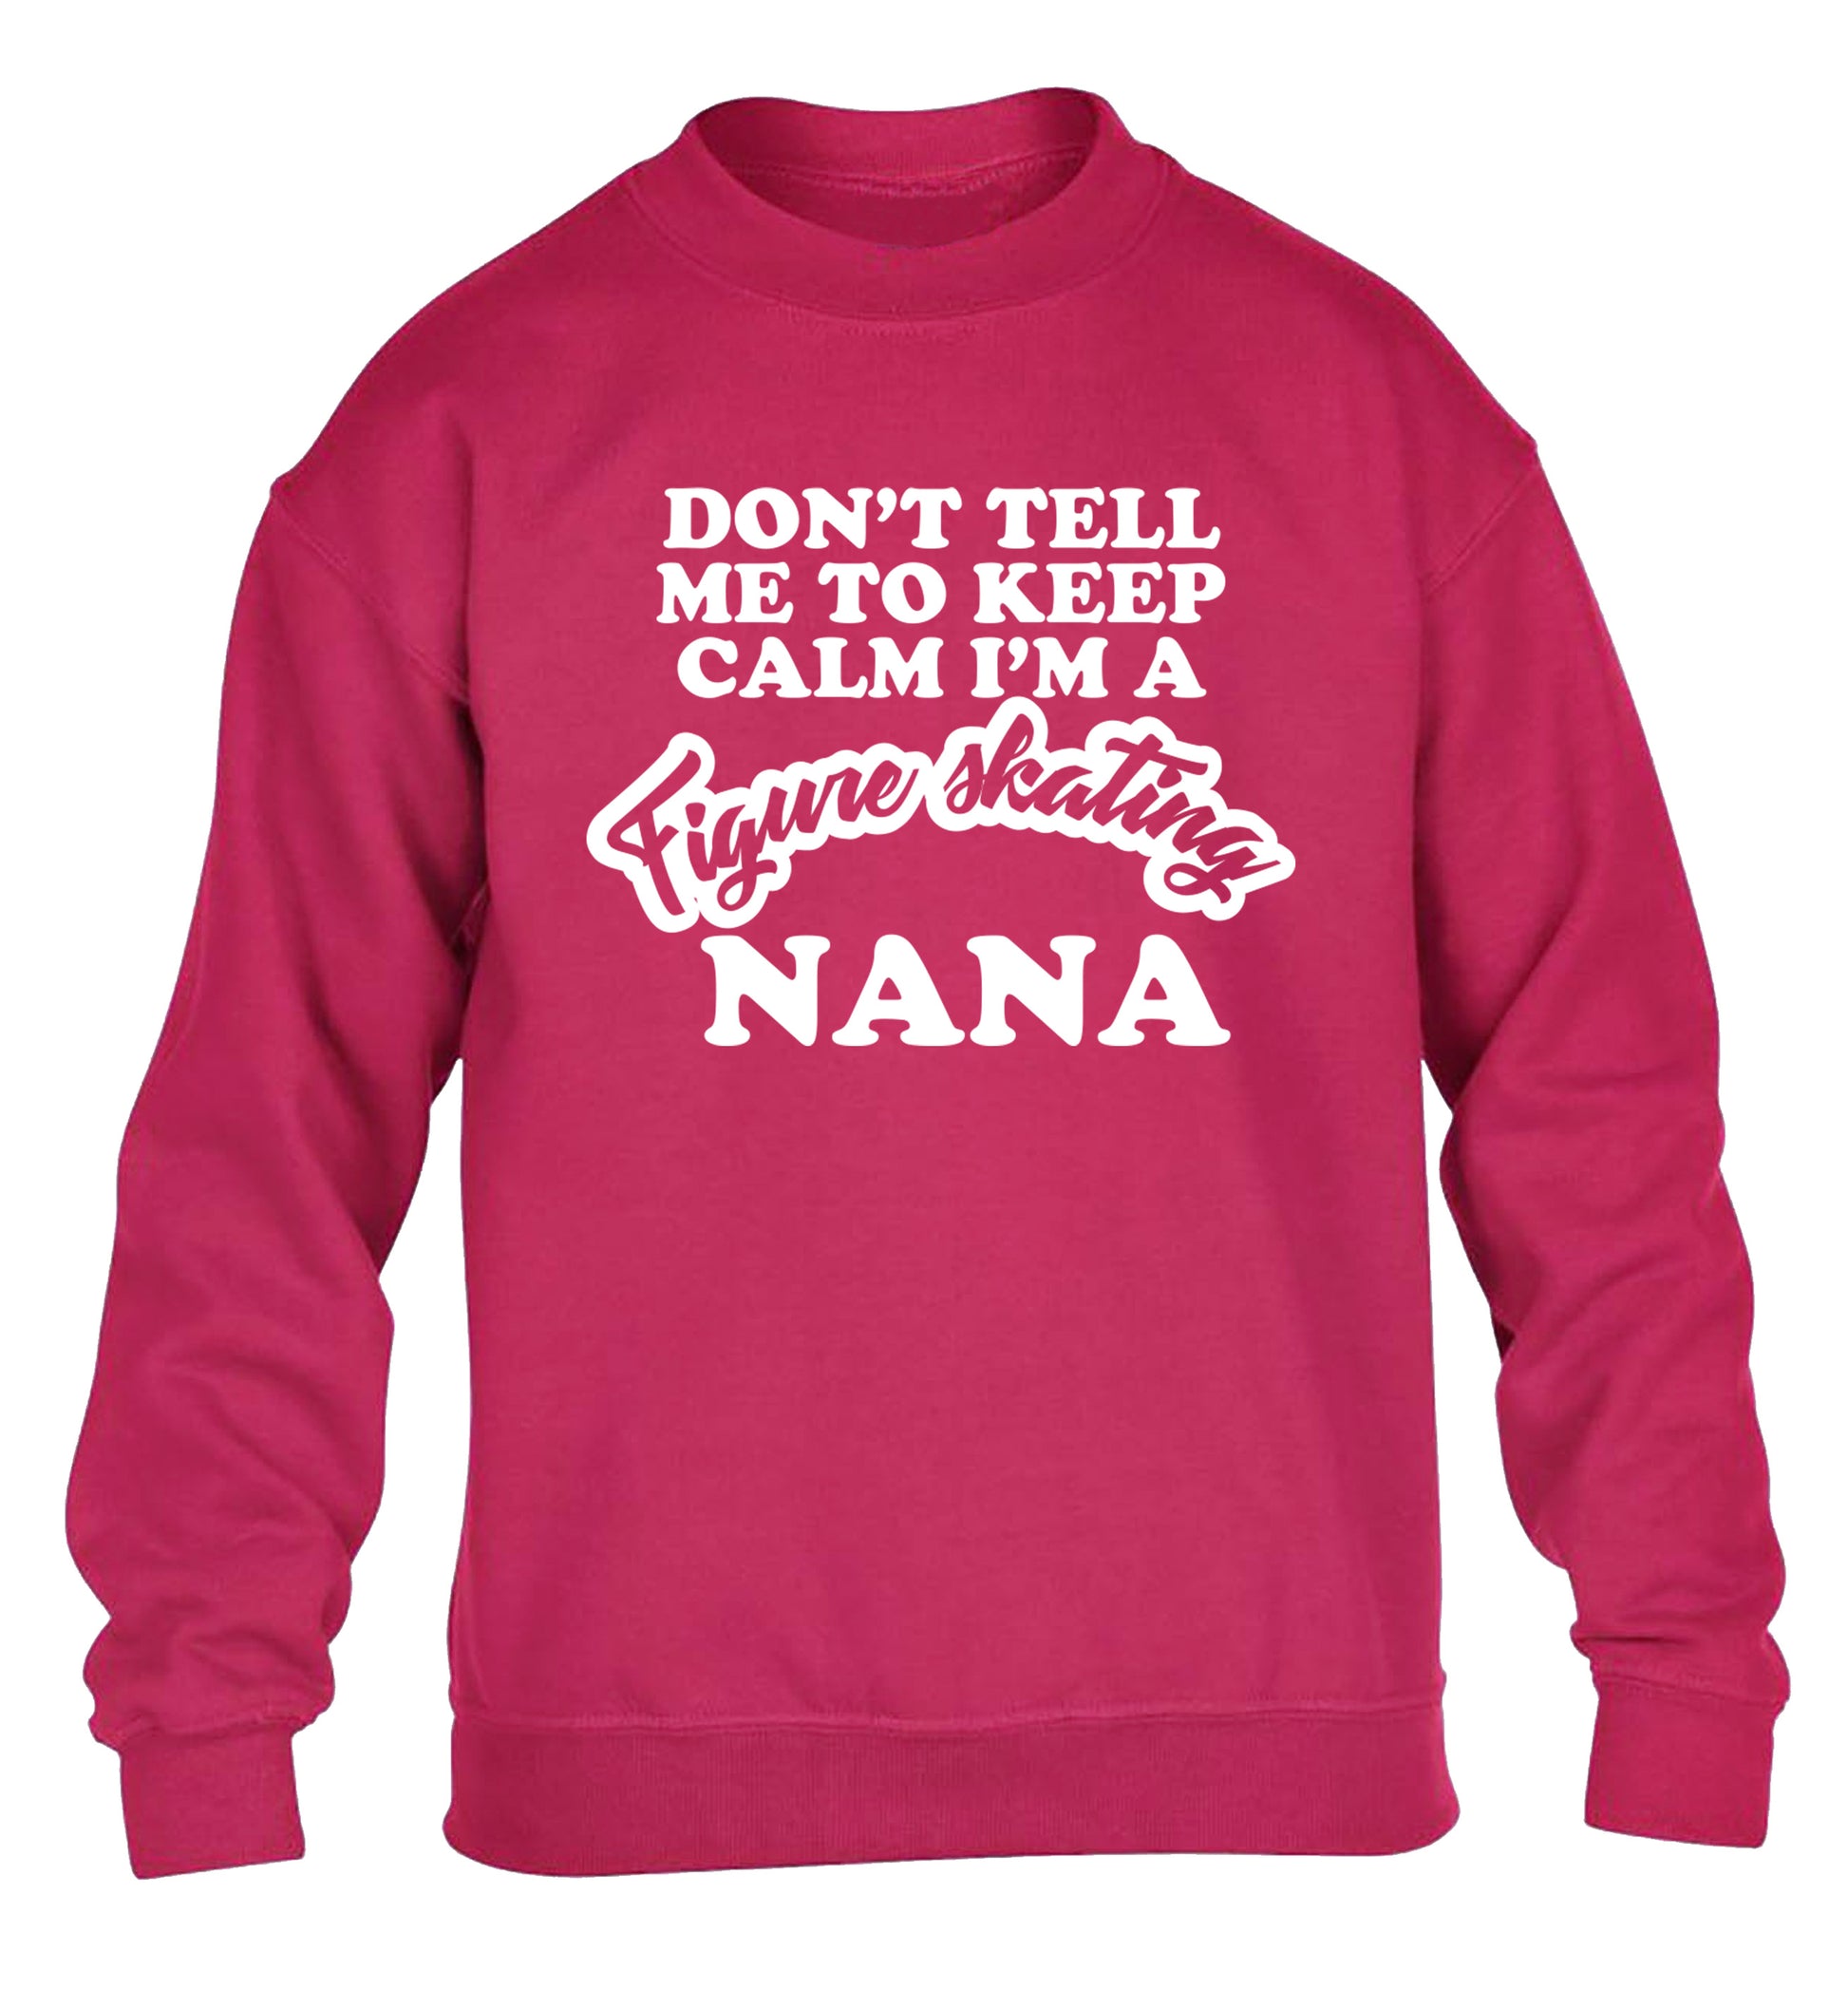 Don't tell me to keep calm I'm a figure skating nana children's pink sweater 12-14 Years